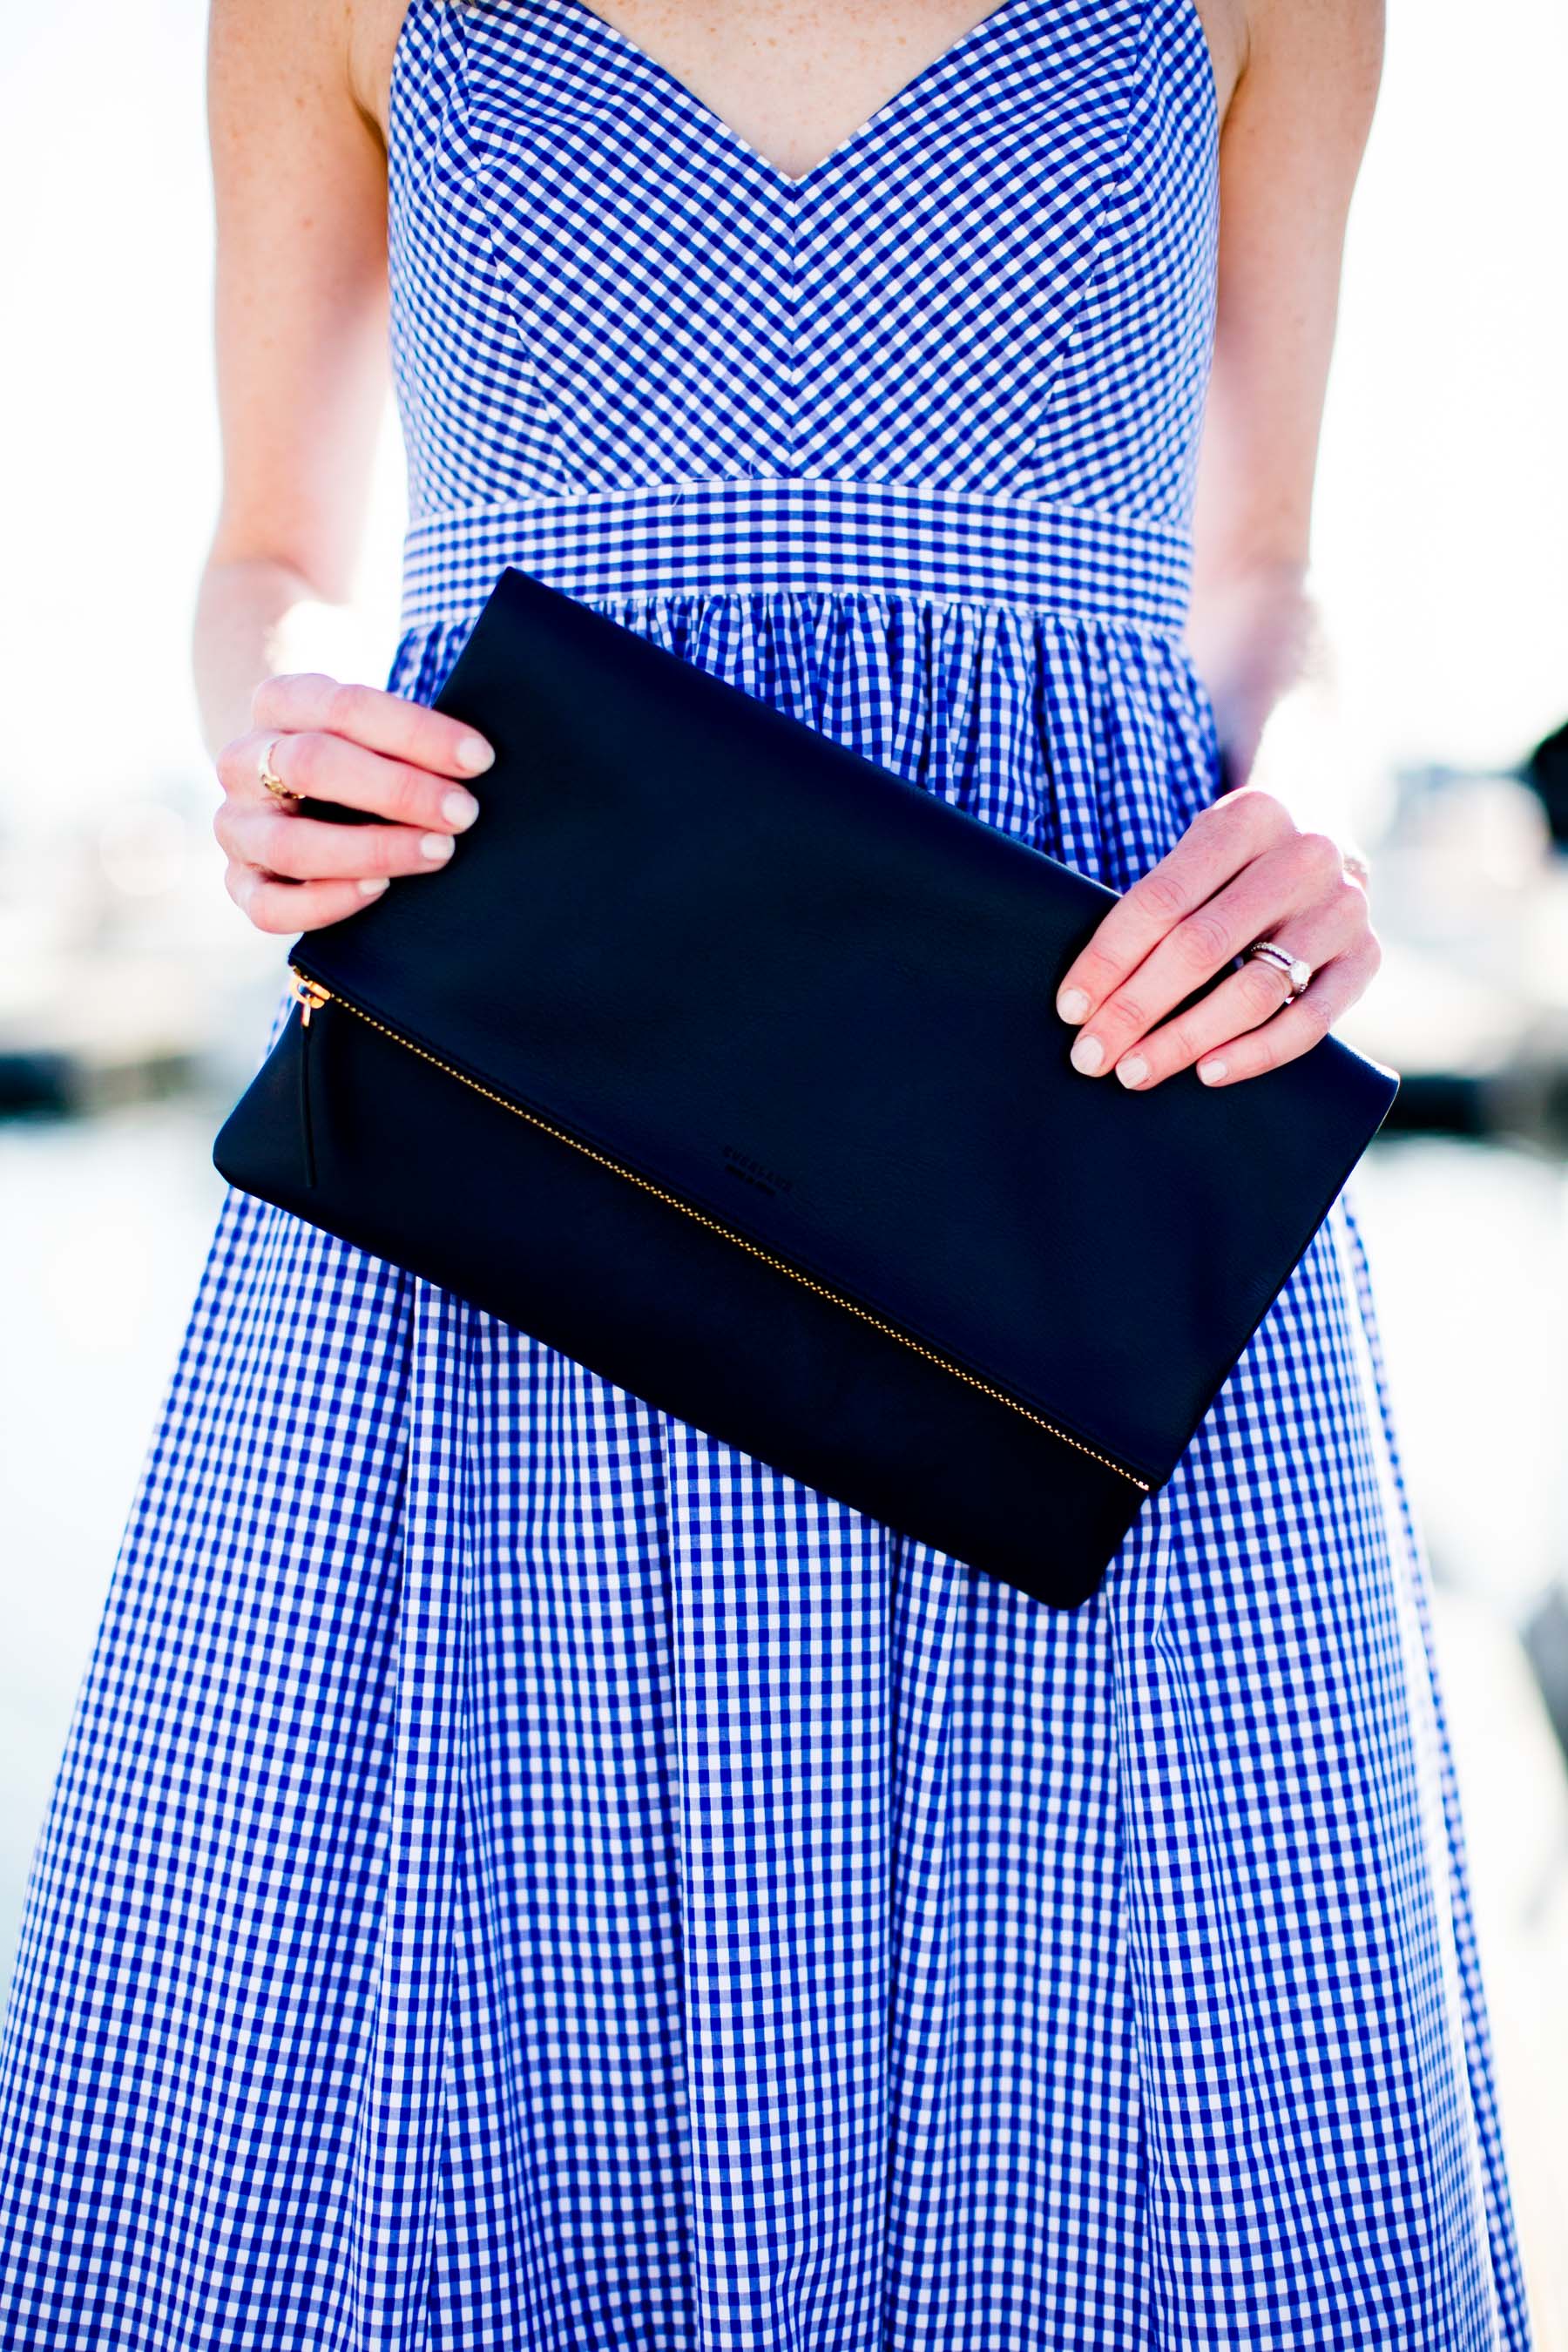 J.Crew Gingham Maxi Dress - Kelly in the City